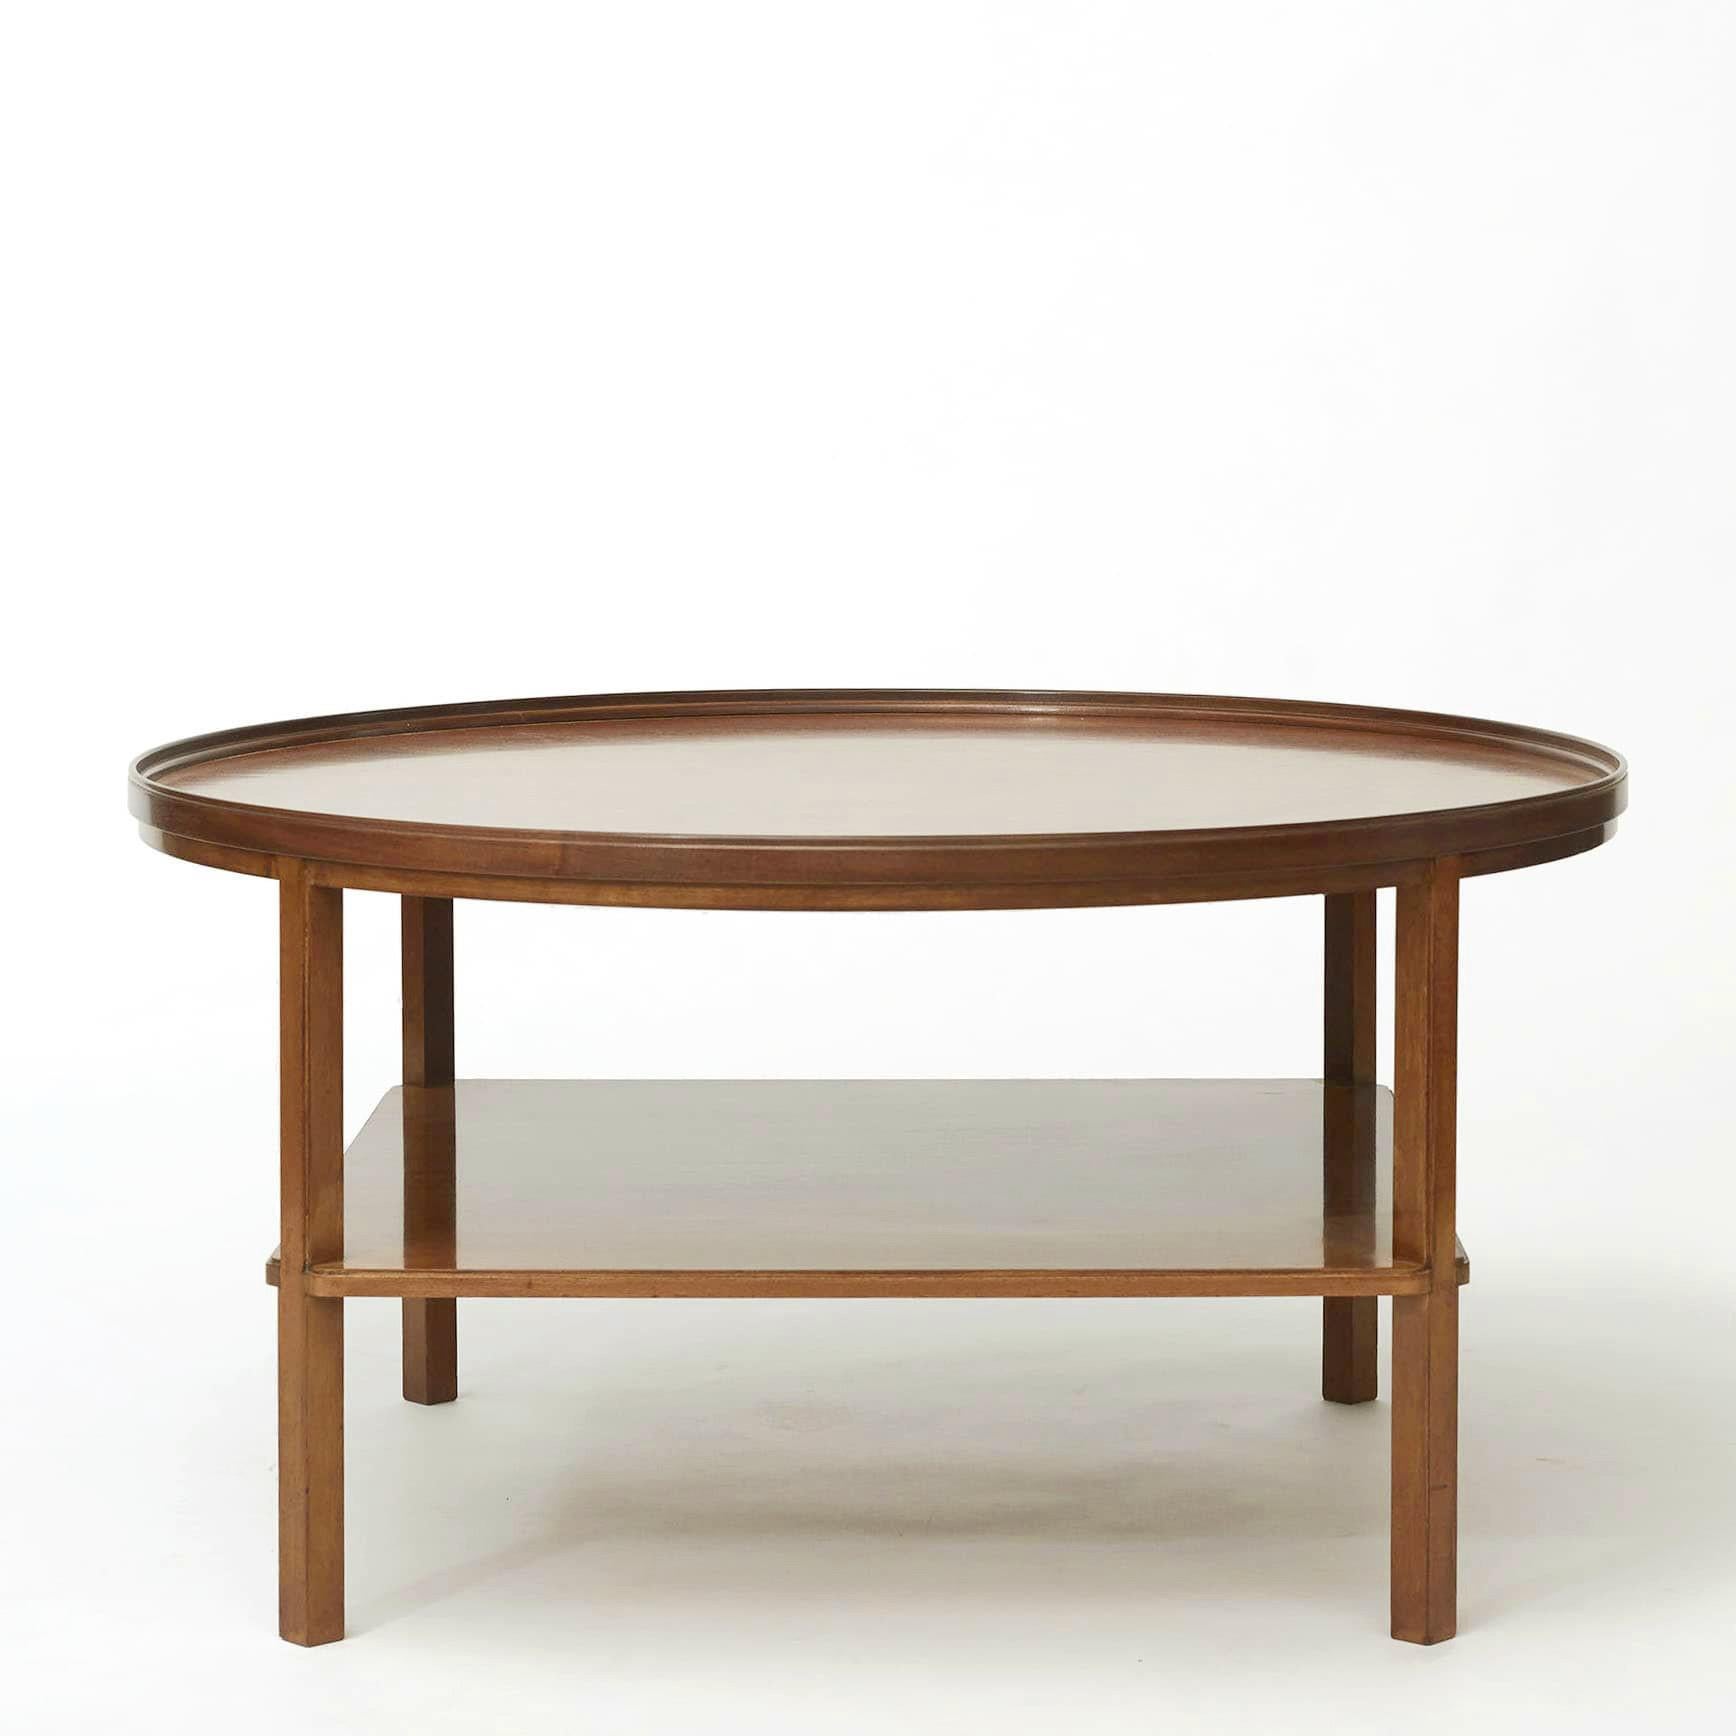 Kaare Klint 1888-1954.
Round mahogany coffee table, table top with profiled kehlet edge. Base shelf with profiled edge and profiled legs between table top and base shelf. Legs from lower shelf and down, without profile.

Designed in 1929, model